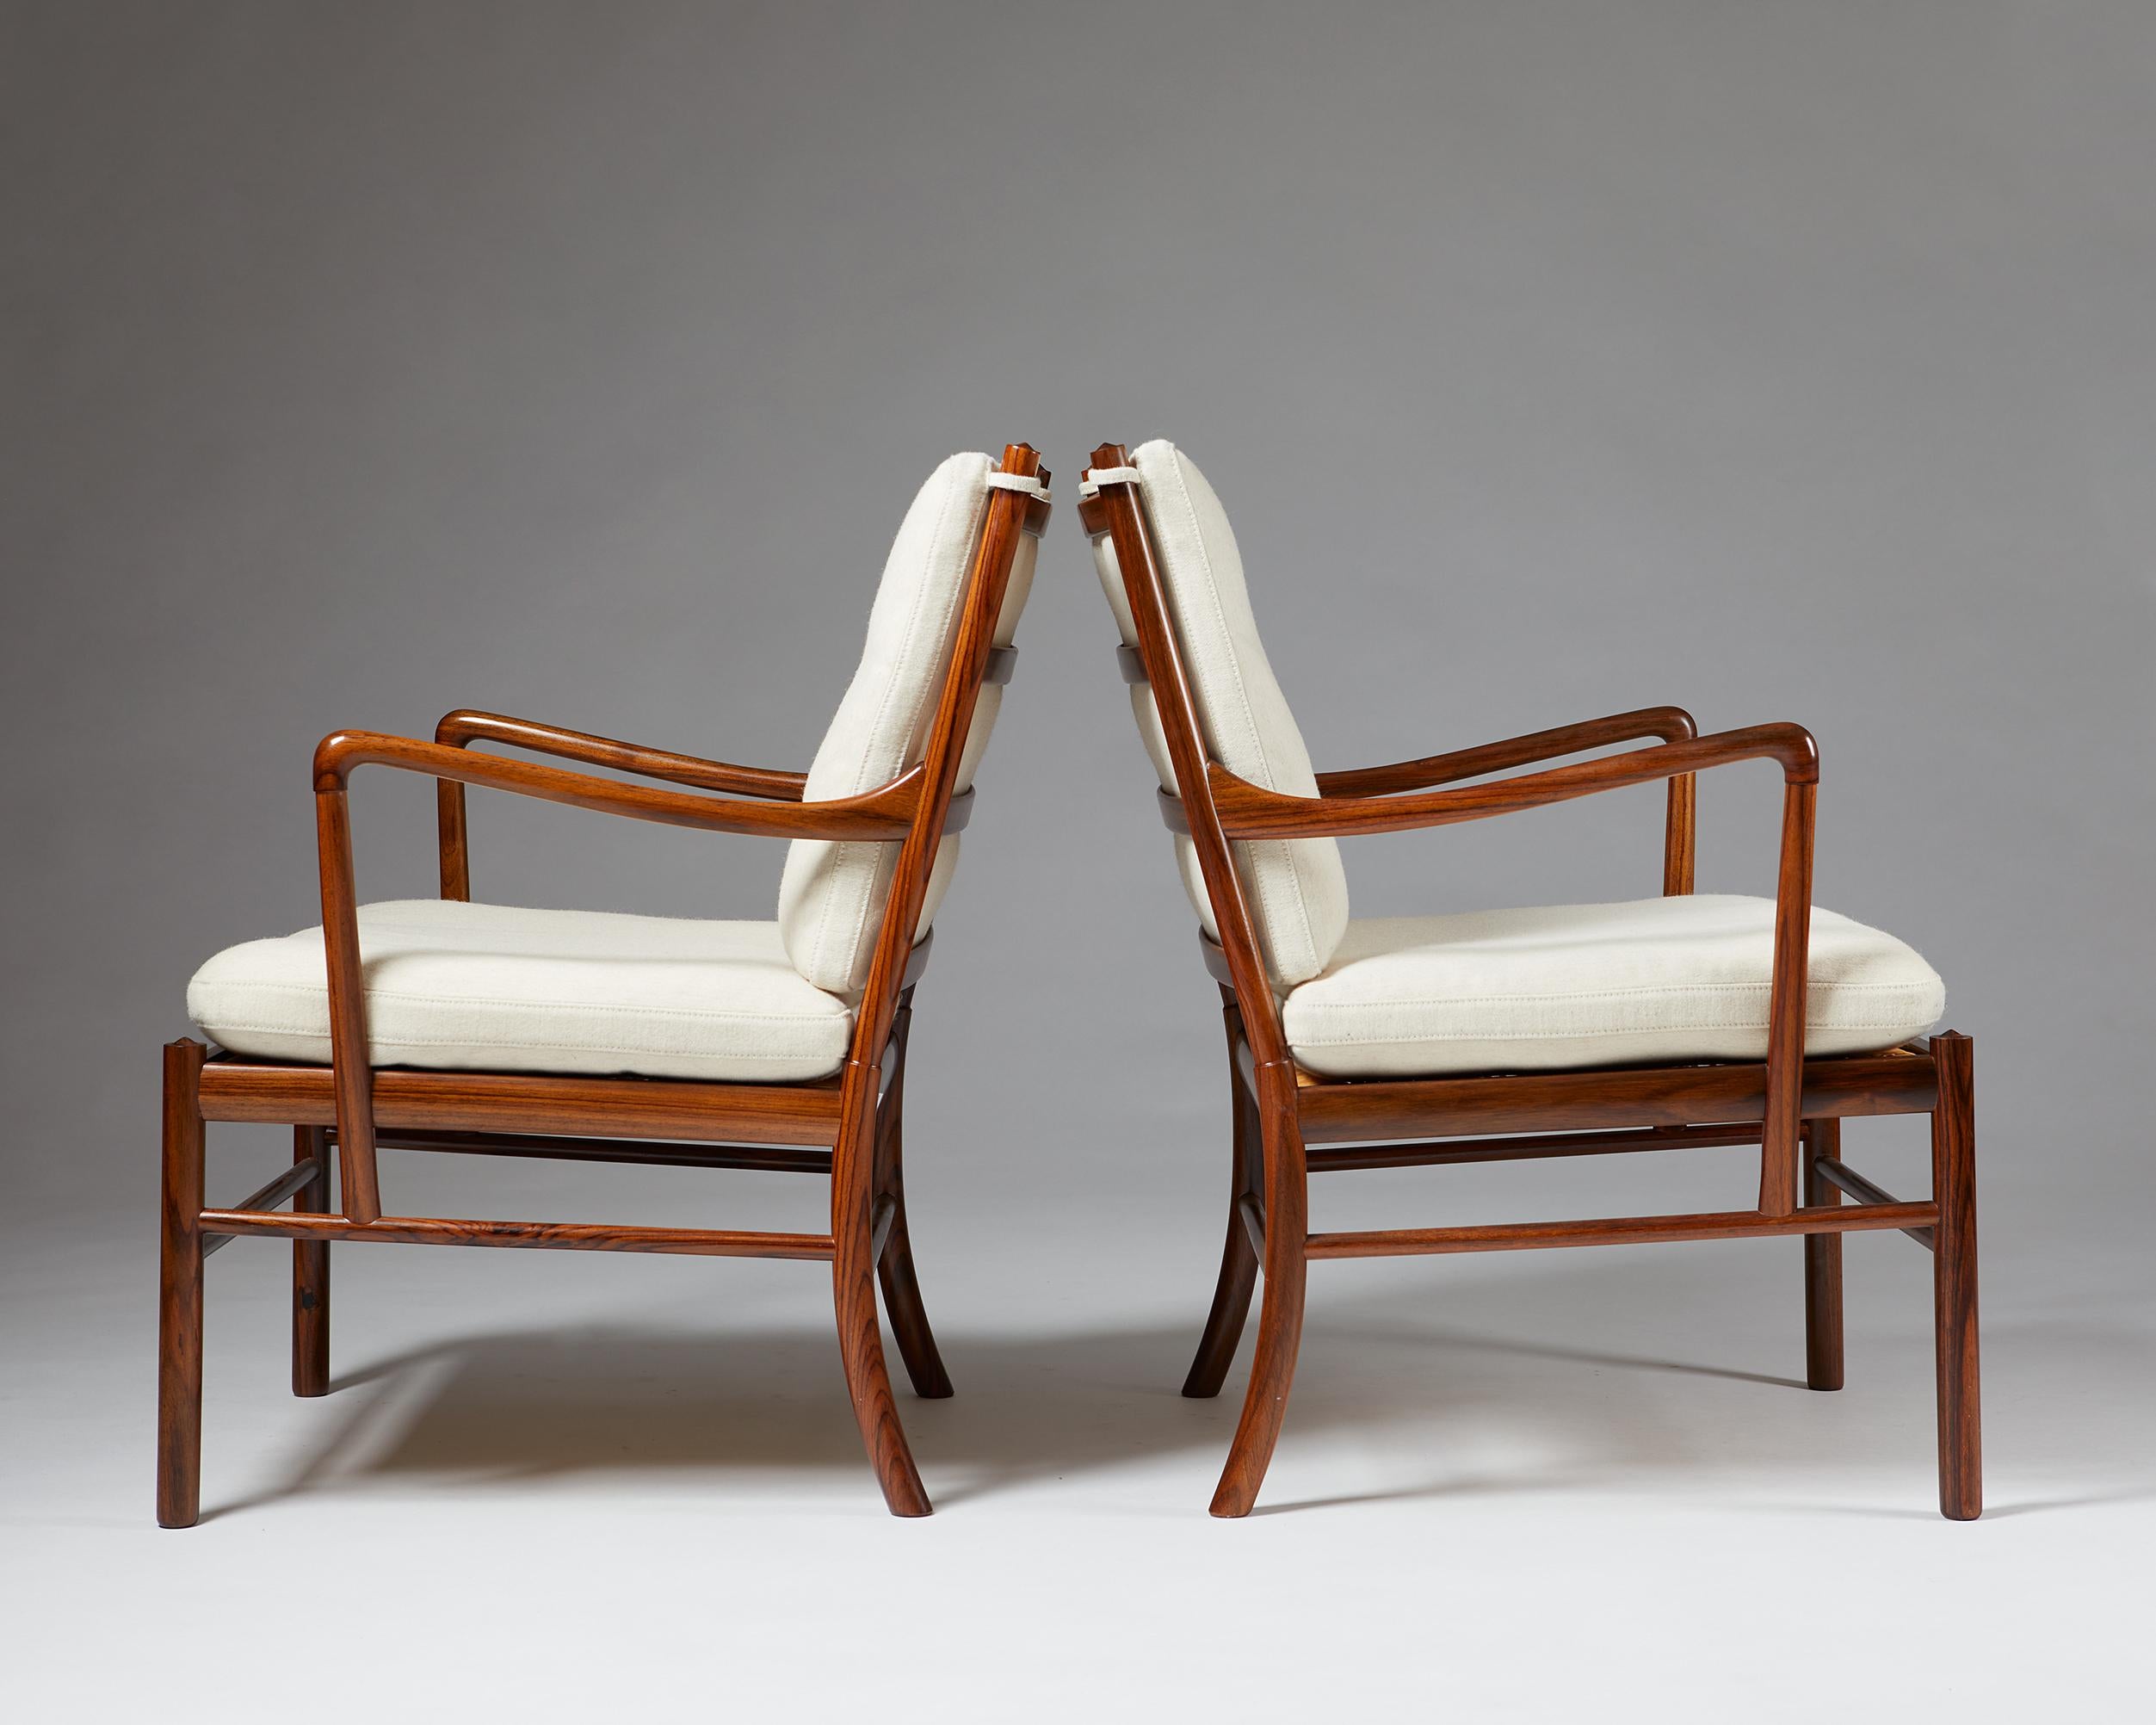 Woven Pair of Armchairs, PJ 149, “Colonial”, Designed by Ole Wanscher for P. Jeppesen